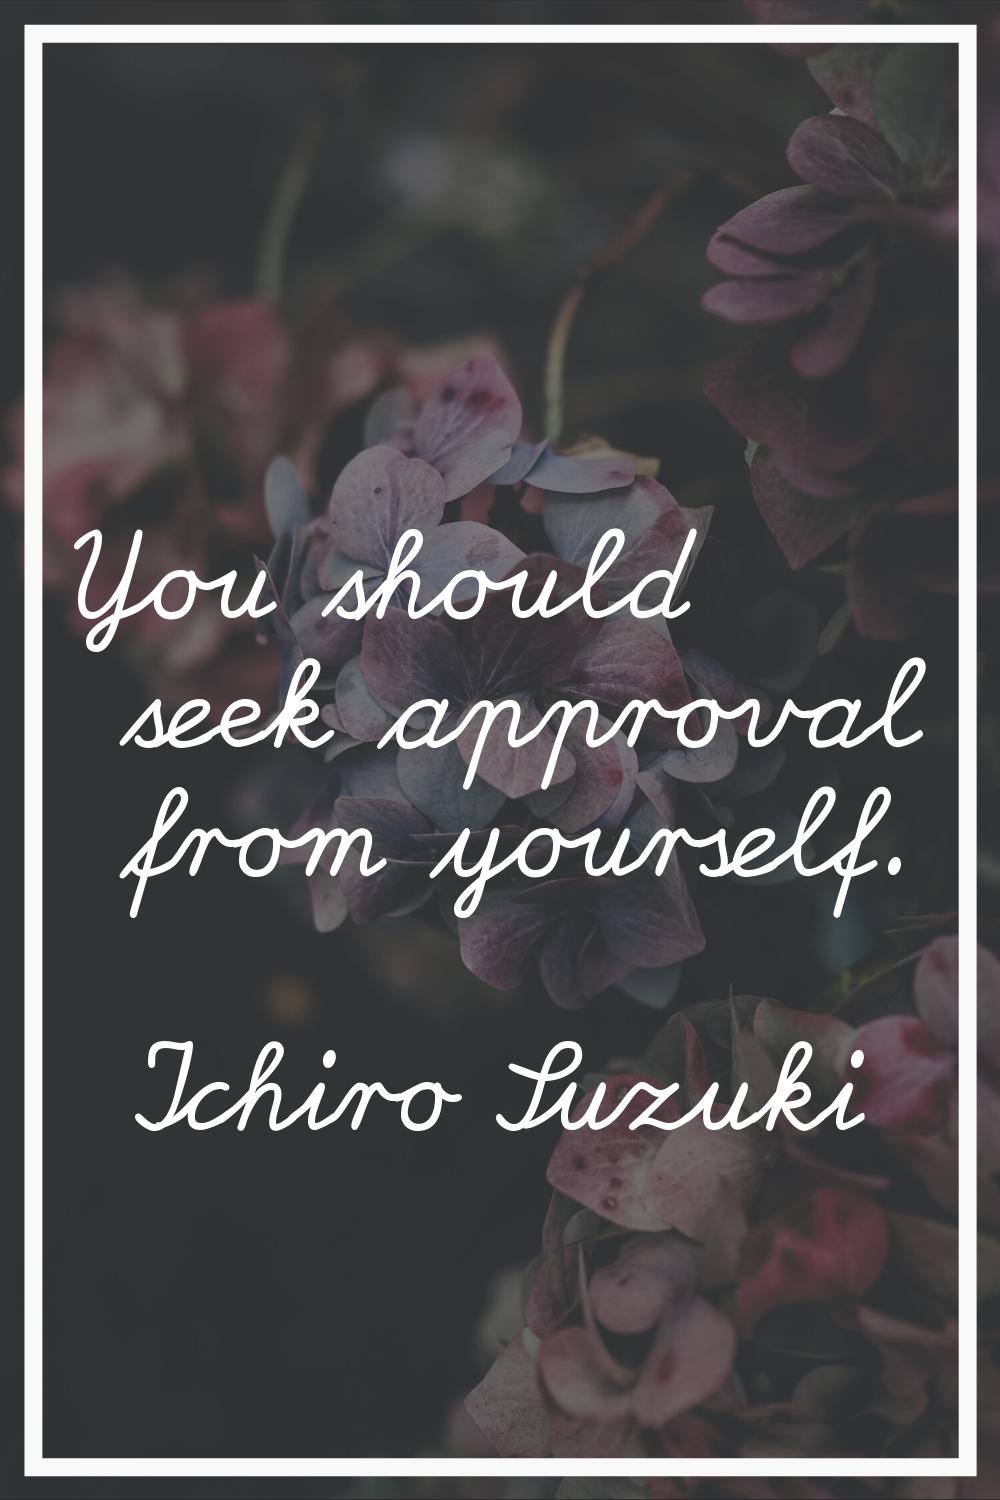 You should seek approval from yourself.